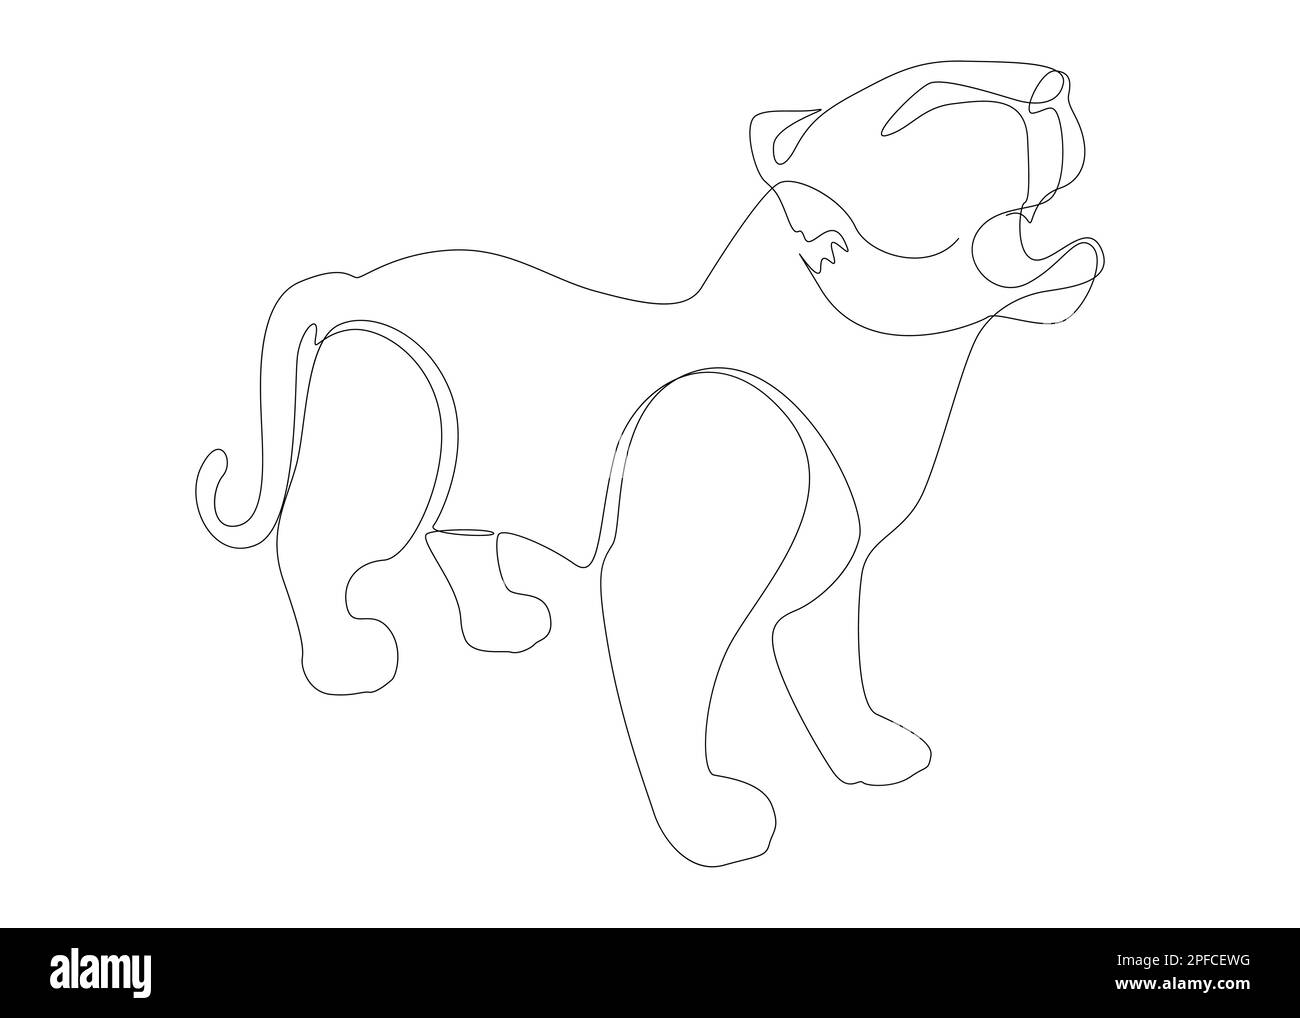 One continuous line of Tiger. Thin Line Illustration vector concept. Contour Drawing Creative ideas. Stock Vector